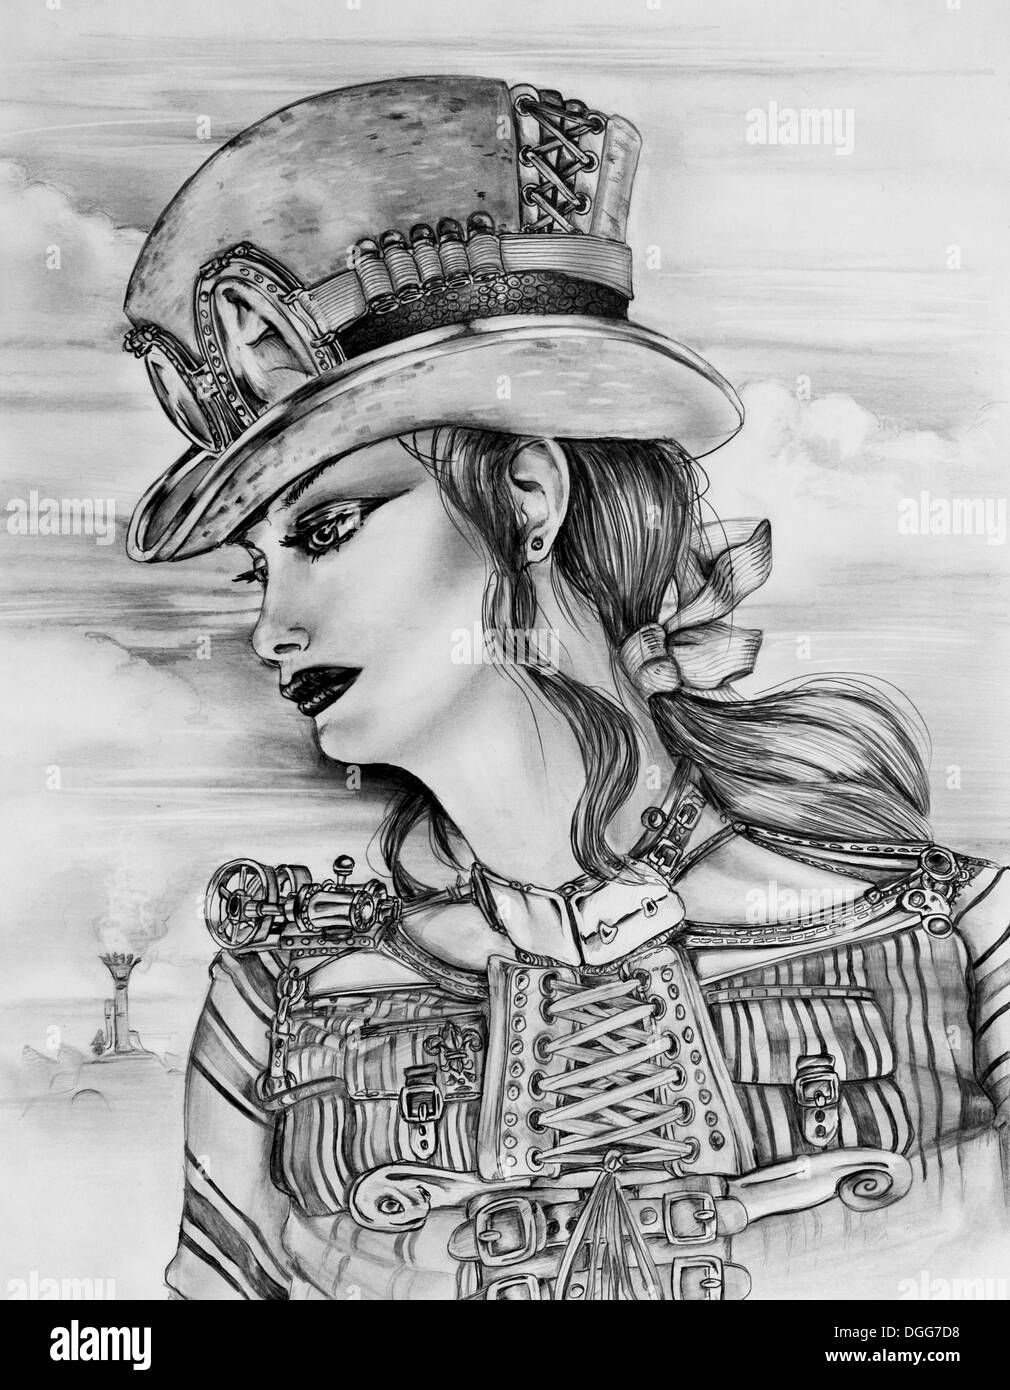 Original pencil sketch drawn by myself of a Steampunk woman in a customized top hat. Stock Photo